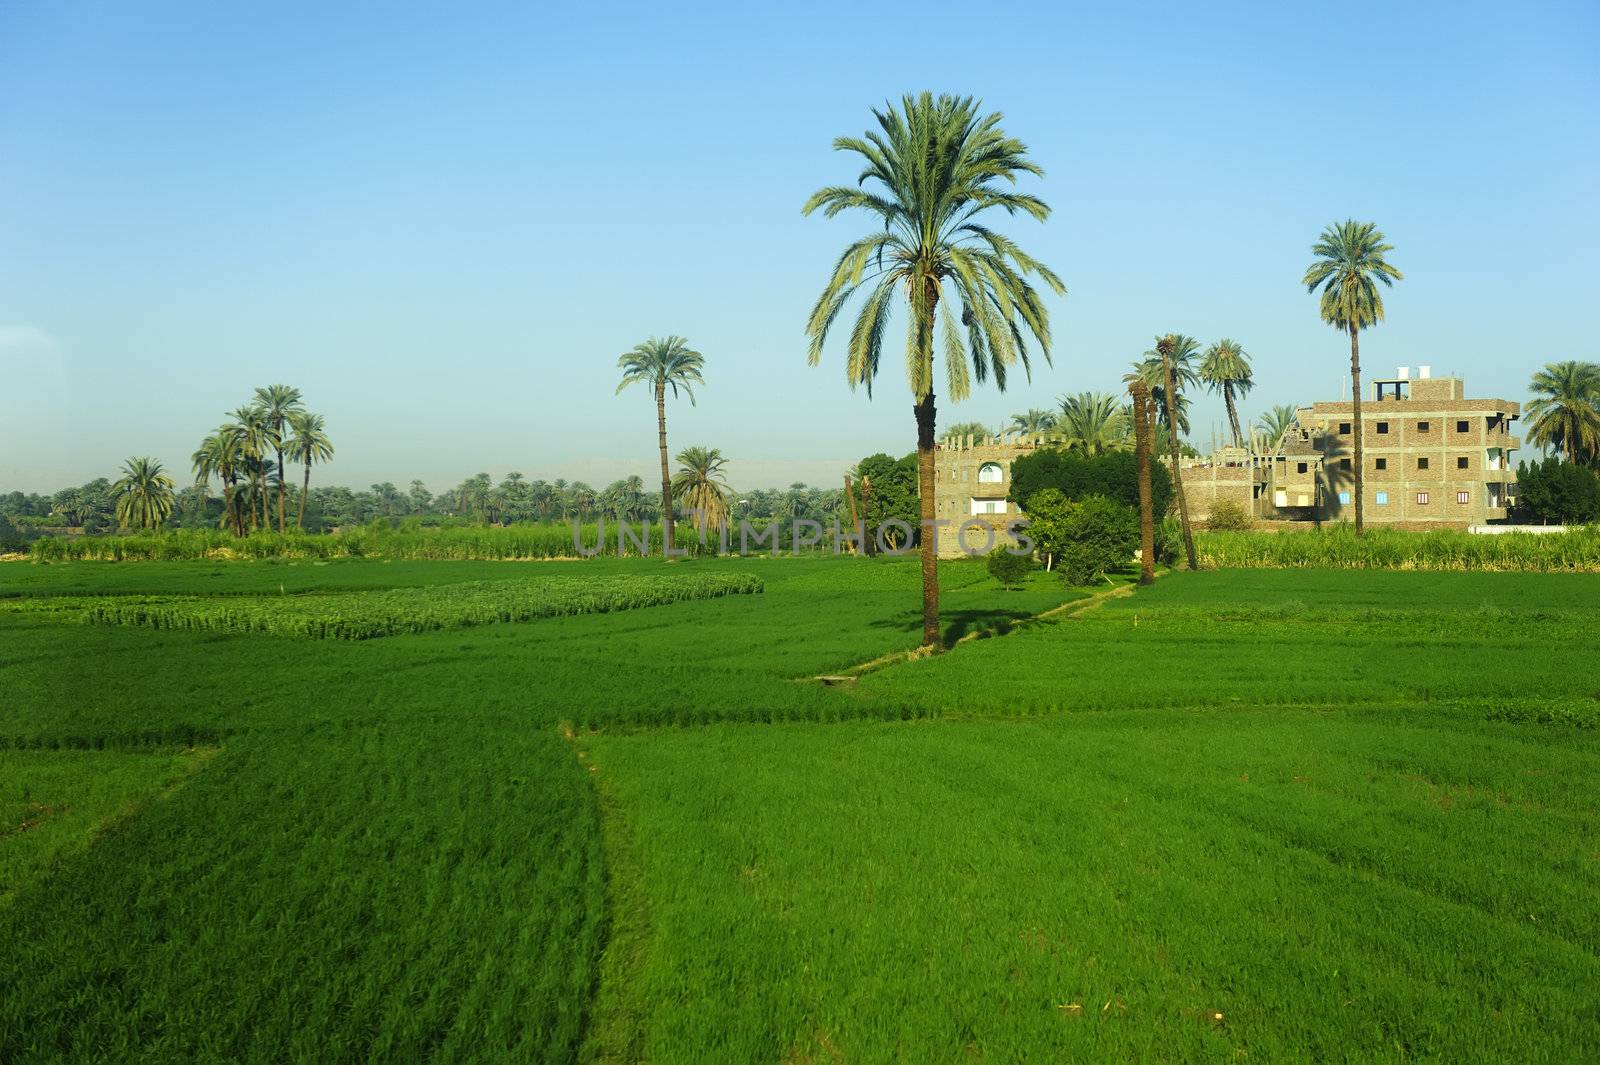 date palm tree in farm land in Egypt by jackq